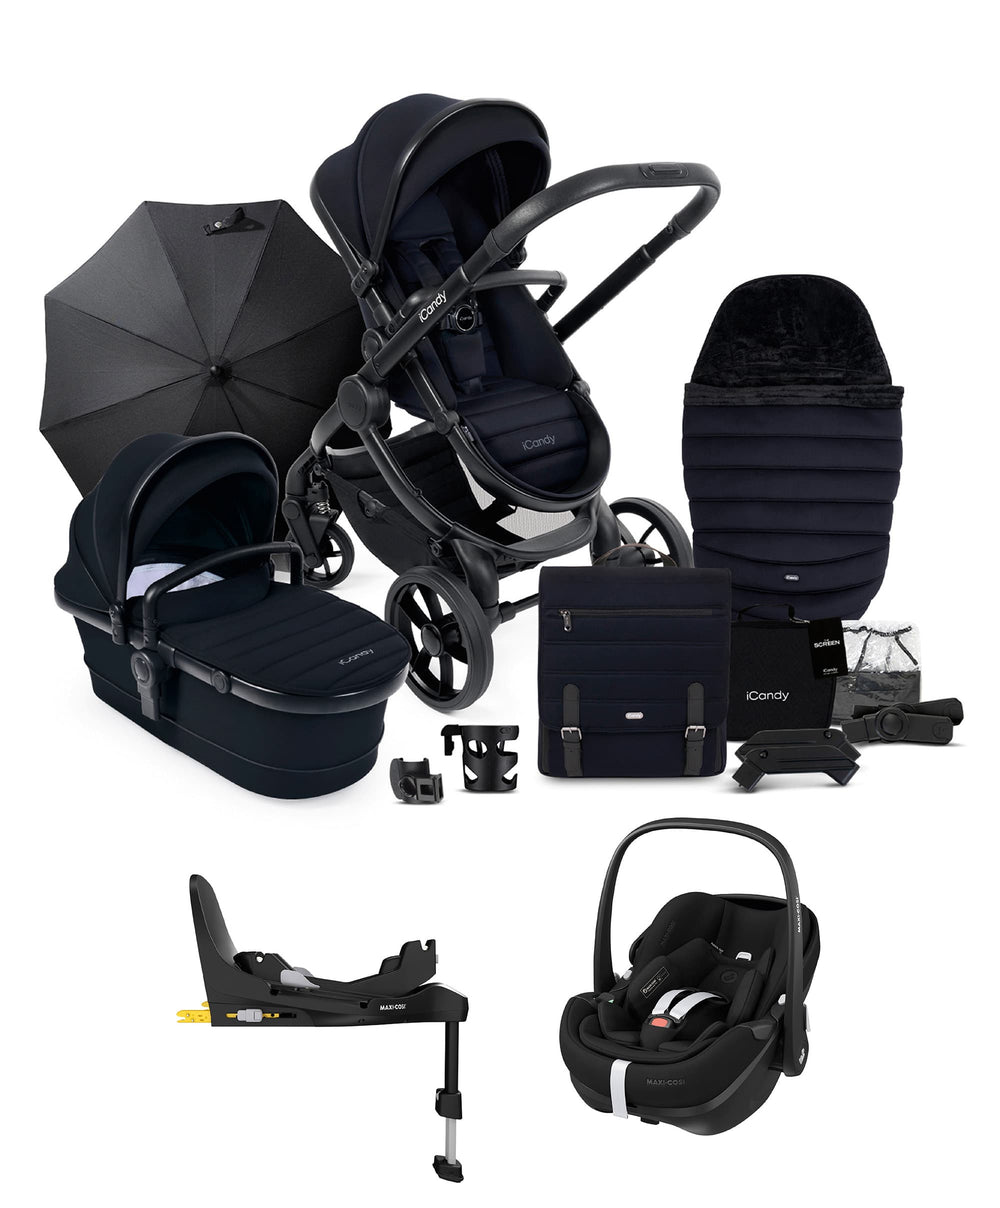 iCandy Pushchairs iCandy Peach 7 Bundle in Black with Maxi-Cosi Pebble 360 Pro Car Seat & FamilyFix 360 Base